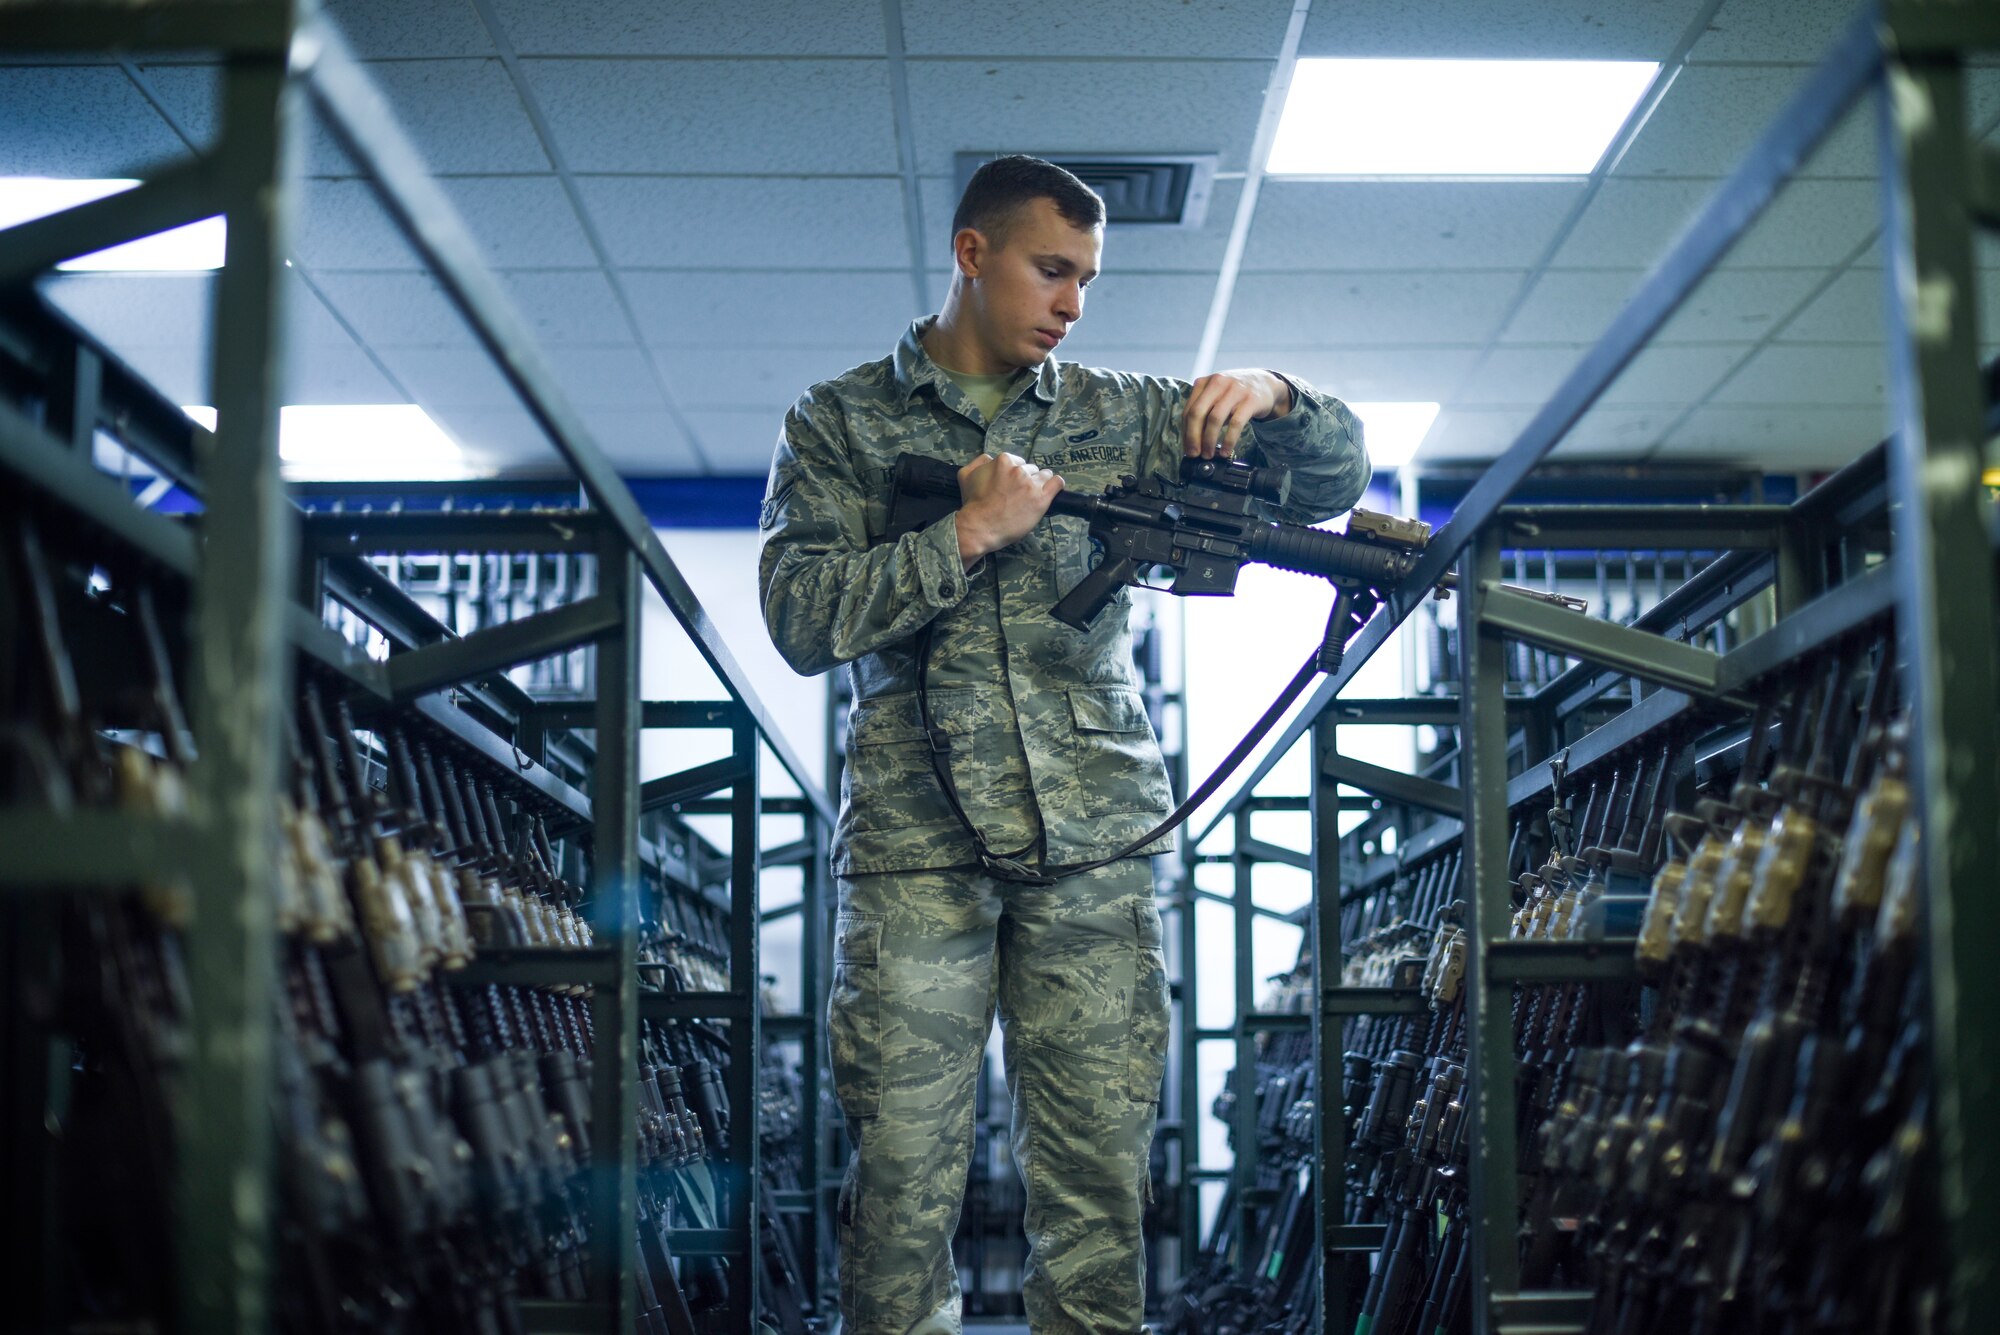 Airman 1st Class Nicholas Terry, 100th Security Forces Squadron armorer, inspects an M-4 carbine rifle at RAF Mildenhall, Great Britain, Sept. 25, 2018. After each shift, weapons must be cleared by security forces Airmen and then turned into the armory for security until the individual needs it again for duty. (U.S. Air Force photo by Airman 1st Class Brandon Esau)